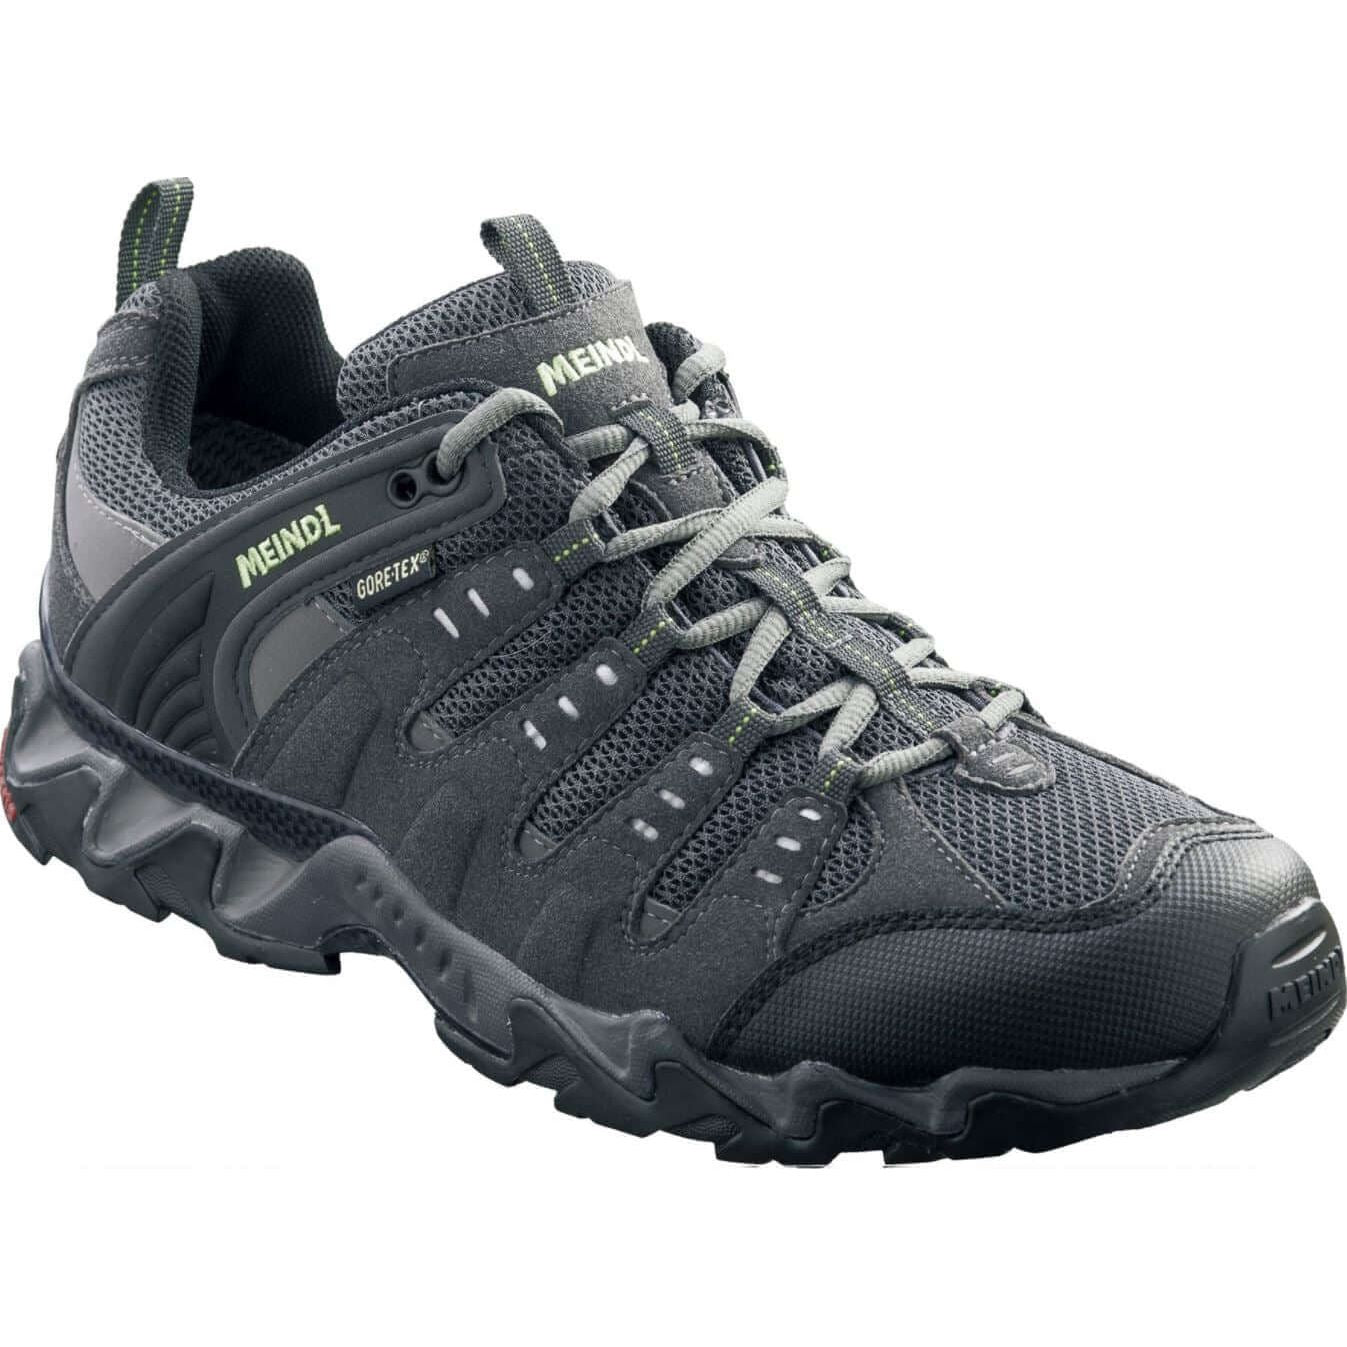 Meindl Respond GTX Walking Shoes - Anthracite